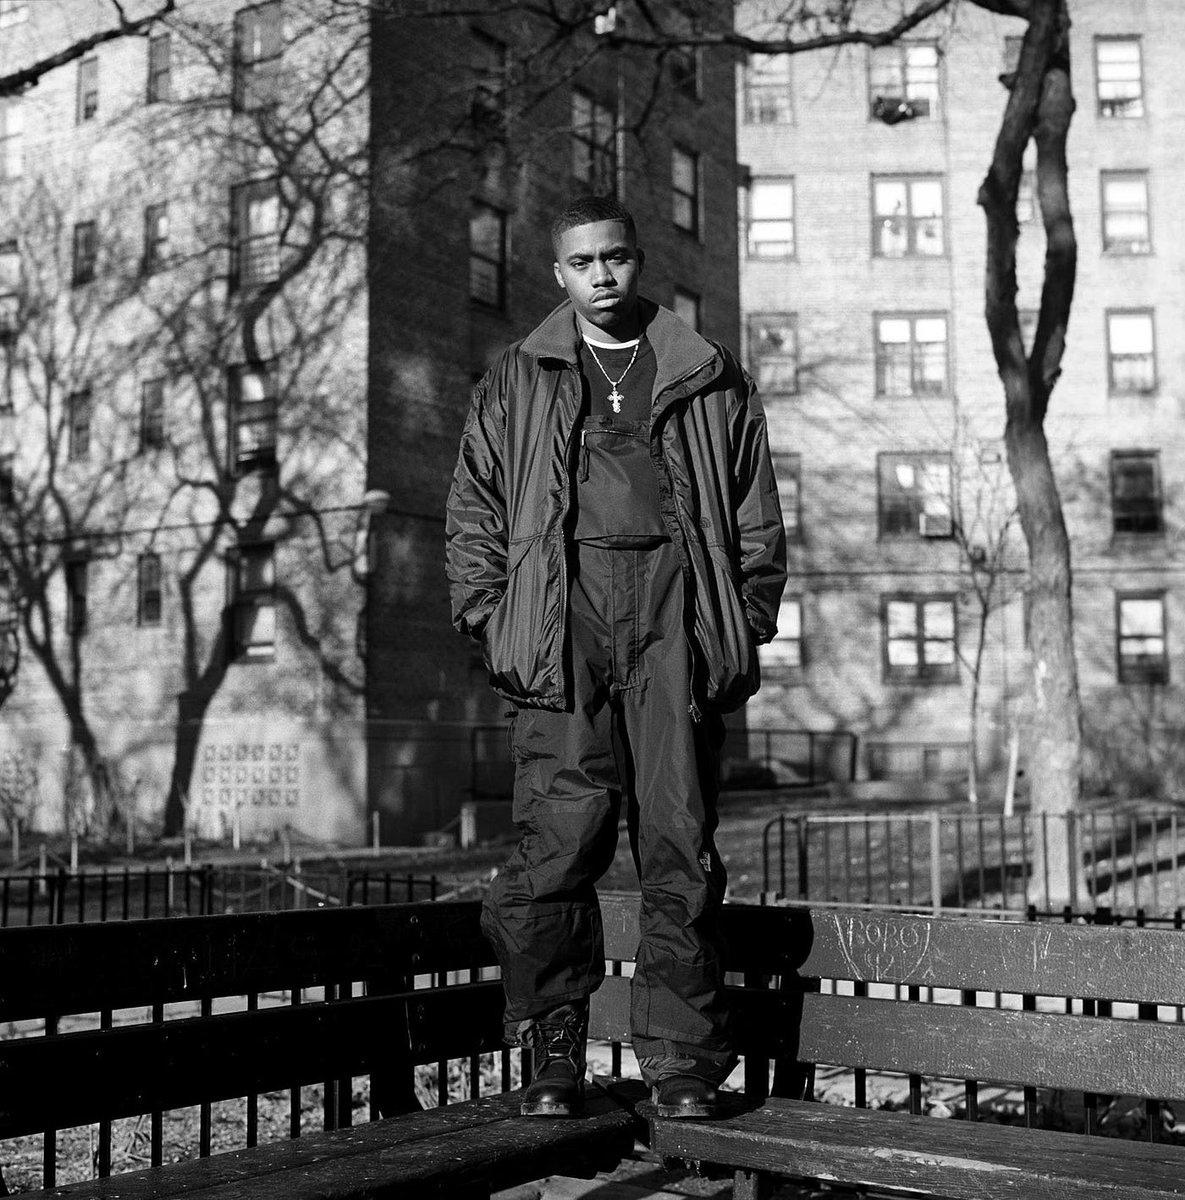 30 years ago today, Nas dropped the 1994 classic 'Illmatic' and reignited the rap game in New York and beyond.

What is your favorite track on the album?